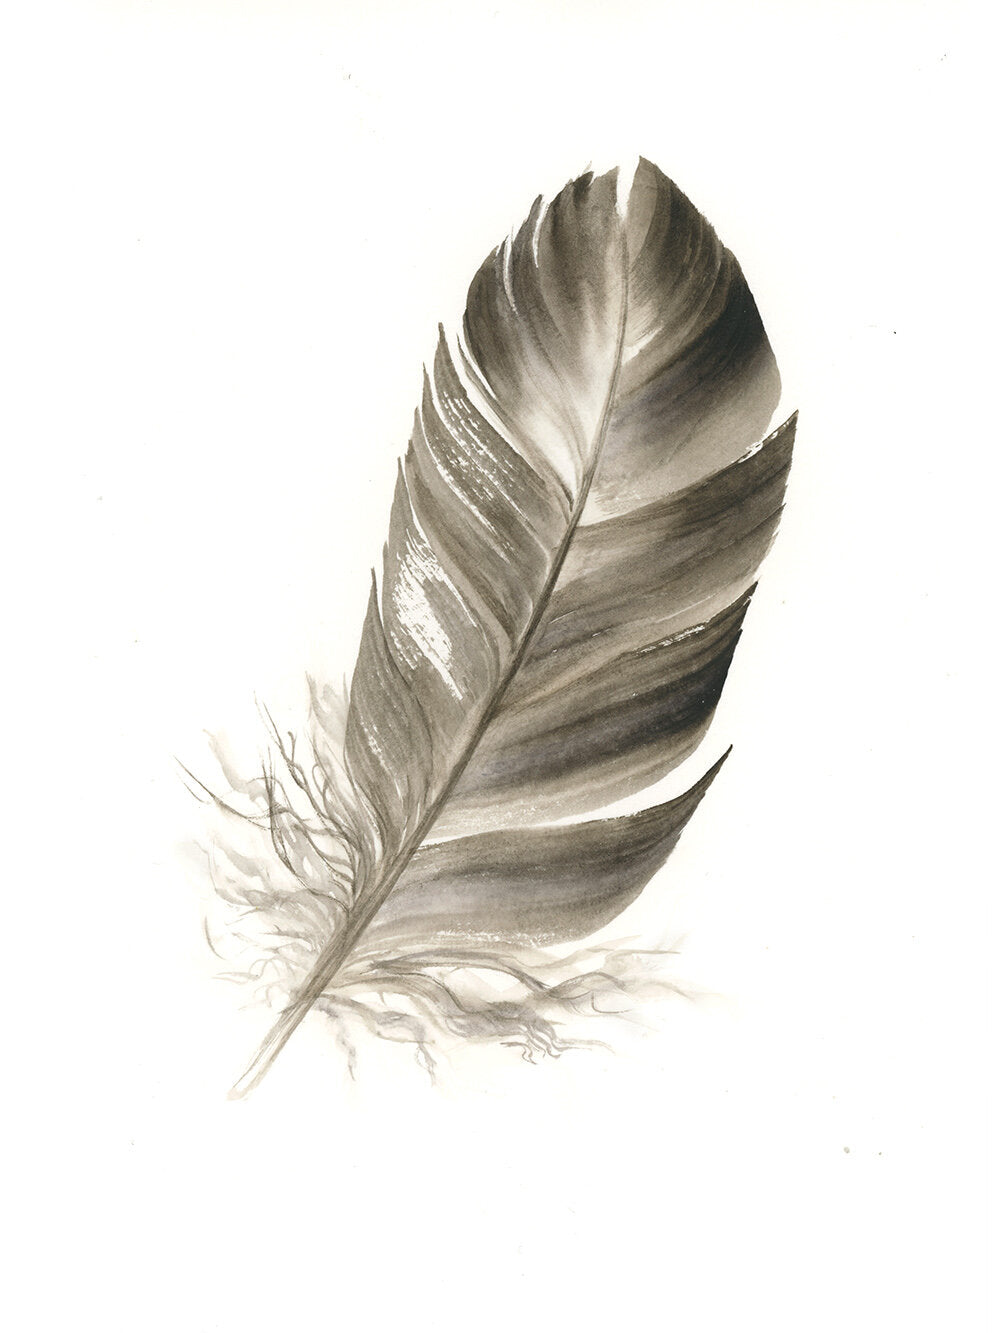 Duck Feather #1 - 6 x 8"